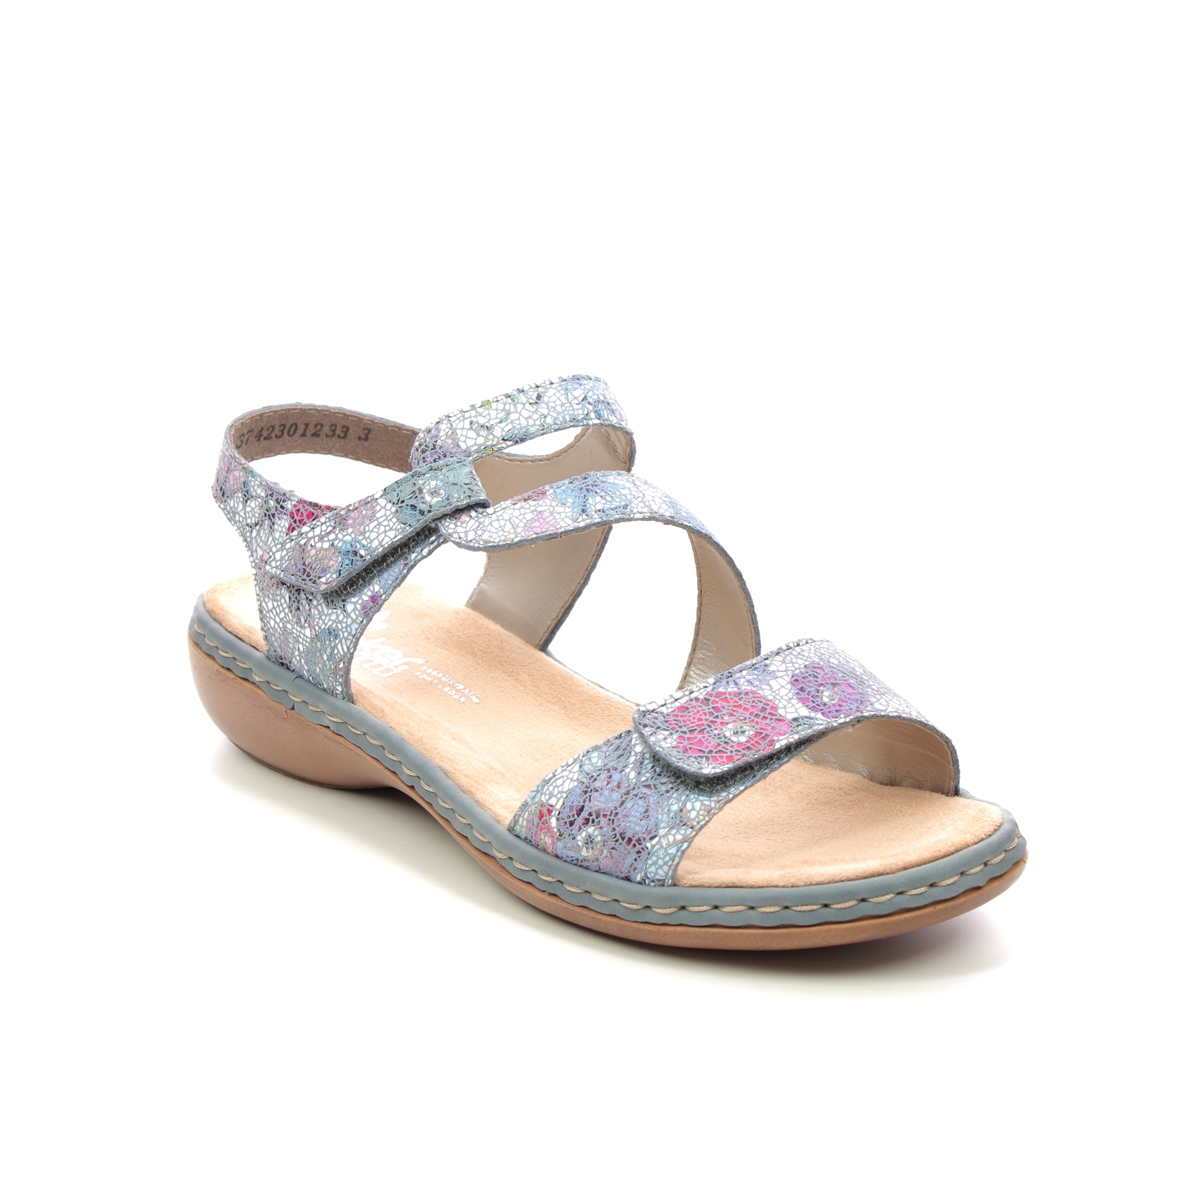 Rieker 659C7-90 Blue Floral Womens Comfortable Sandals in a Plain Leather in Size 40